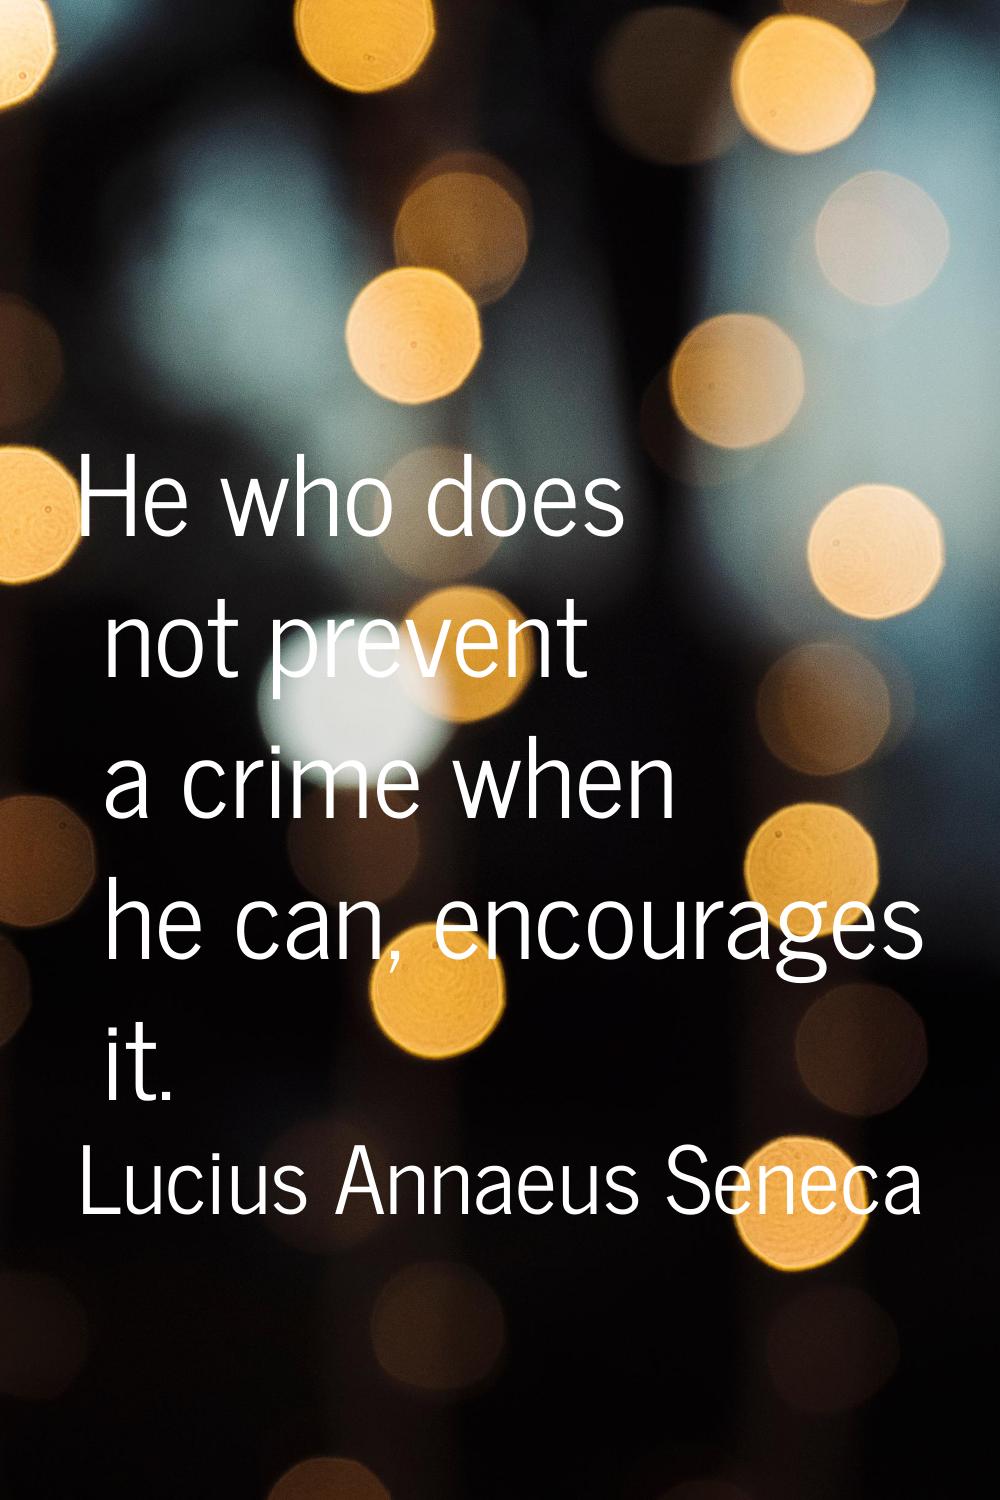 He who does not prevent a crime when he can, encourages it.